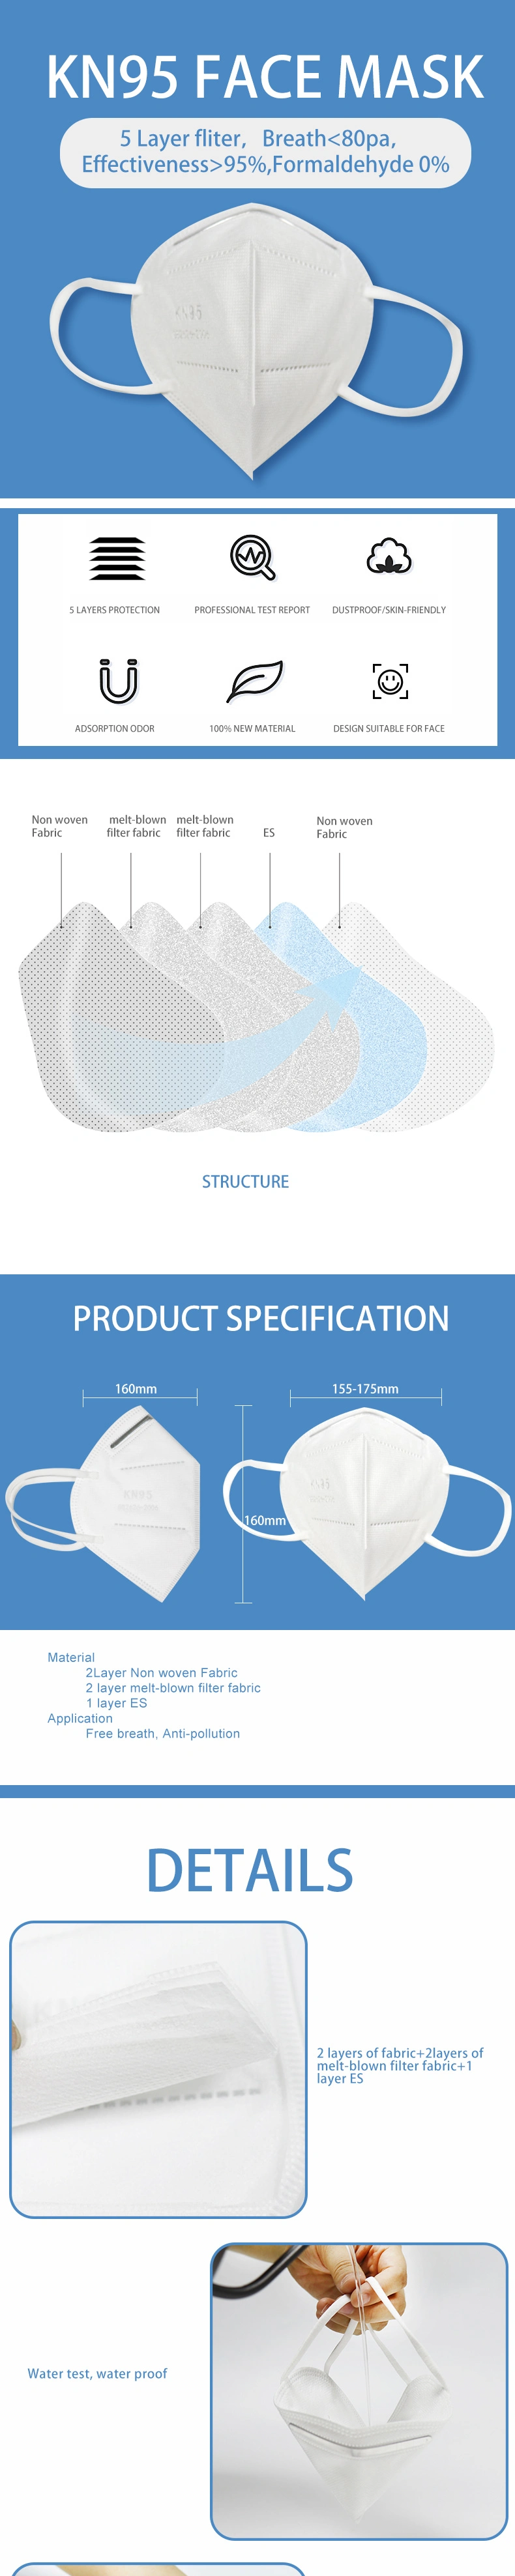 Hot Sale Non-Woven Disposable KN95 Mask Filter Face Mask Earloop KN95 Kn 95 Mask